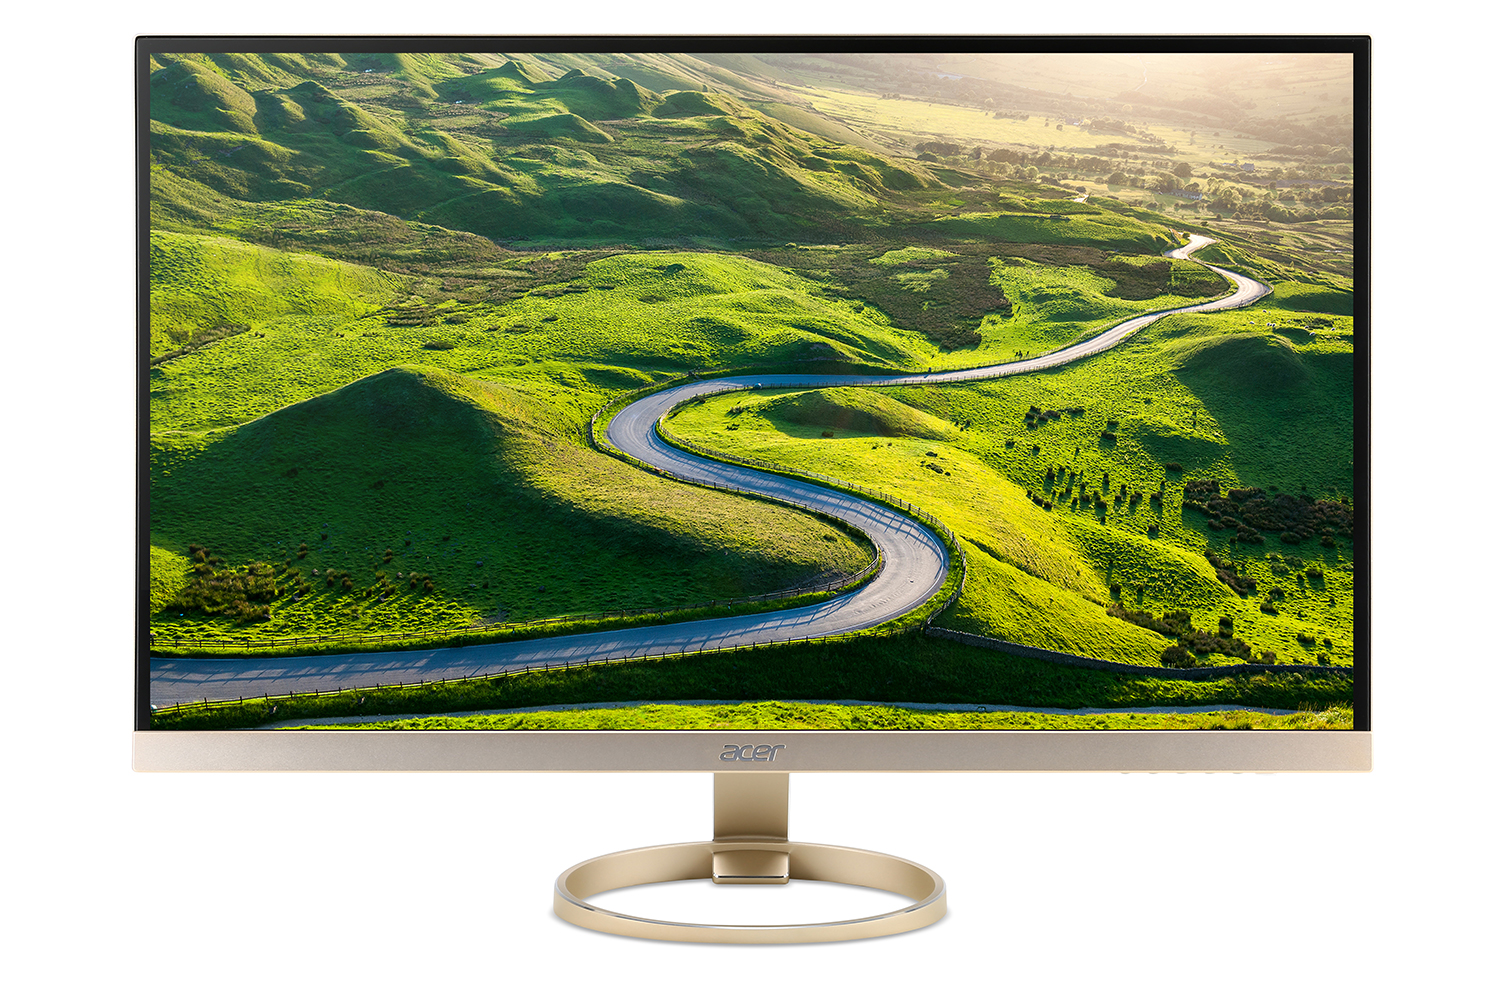 acer computing announce ces 2016 h277hu straight on